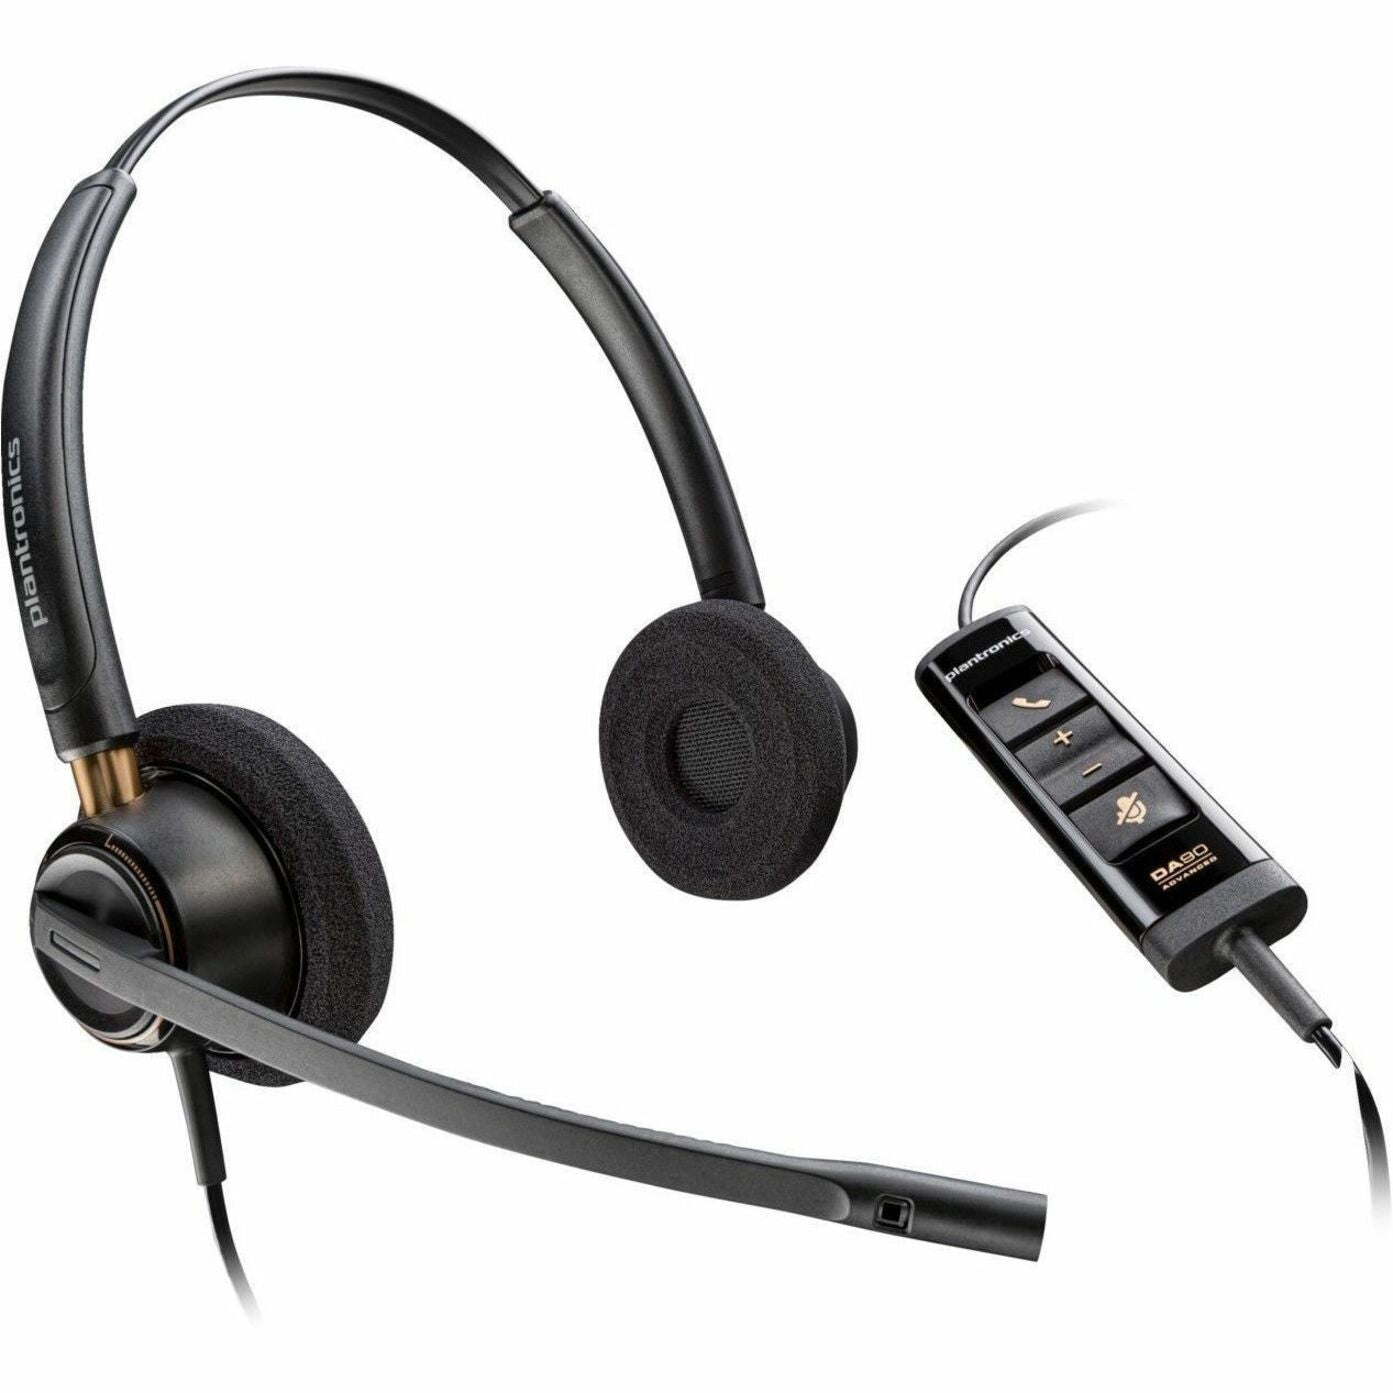 Poly 783R3AA EncorePro 525 Headset Binaural On-ear/Over-the-ear USB Type A for Home Notebook Voice Call Office 